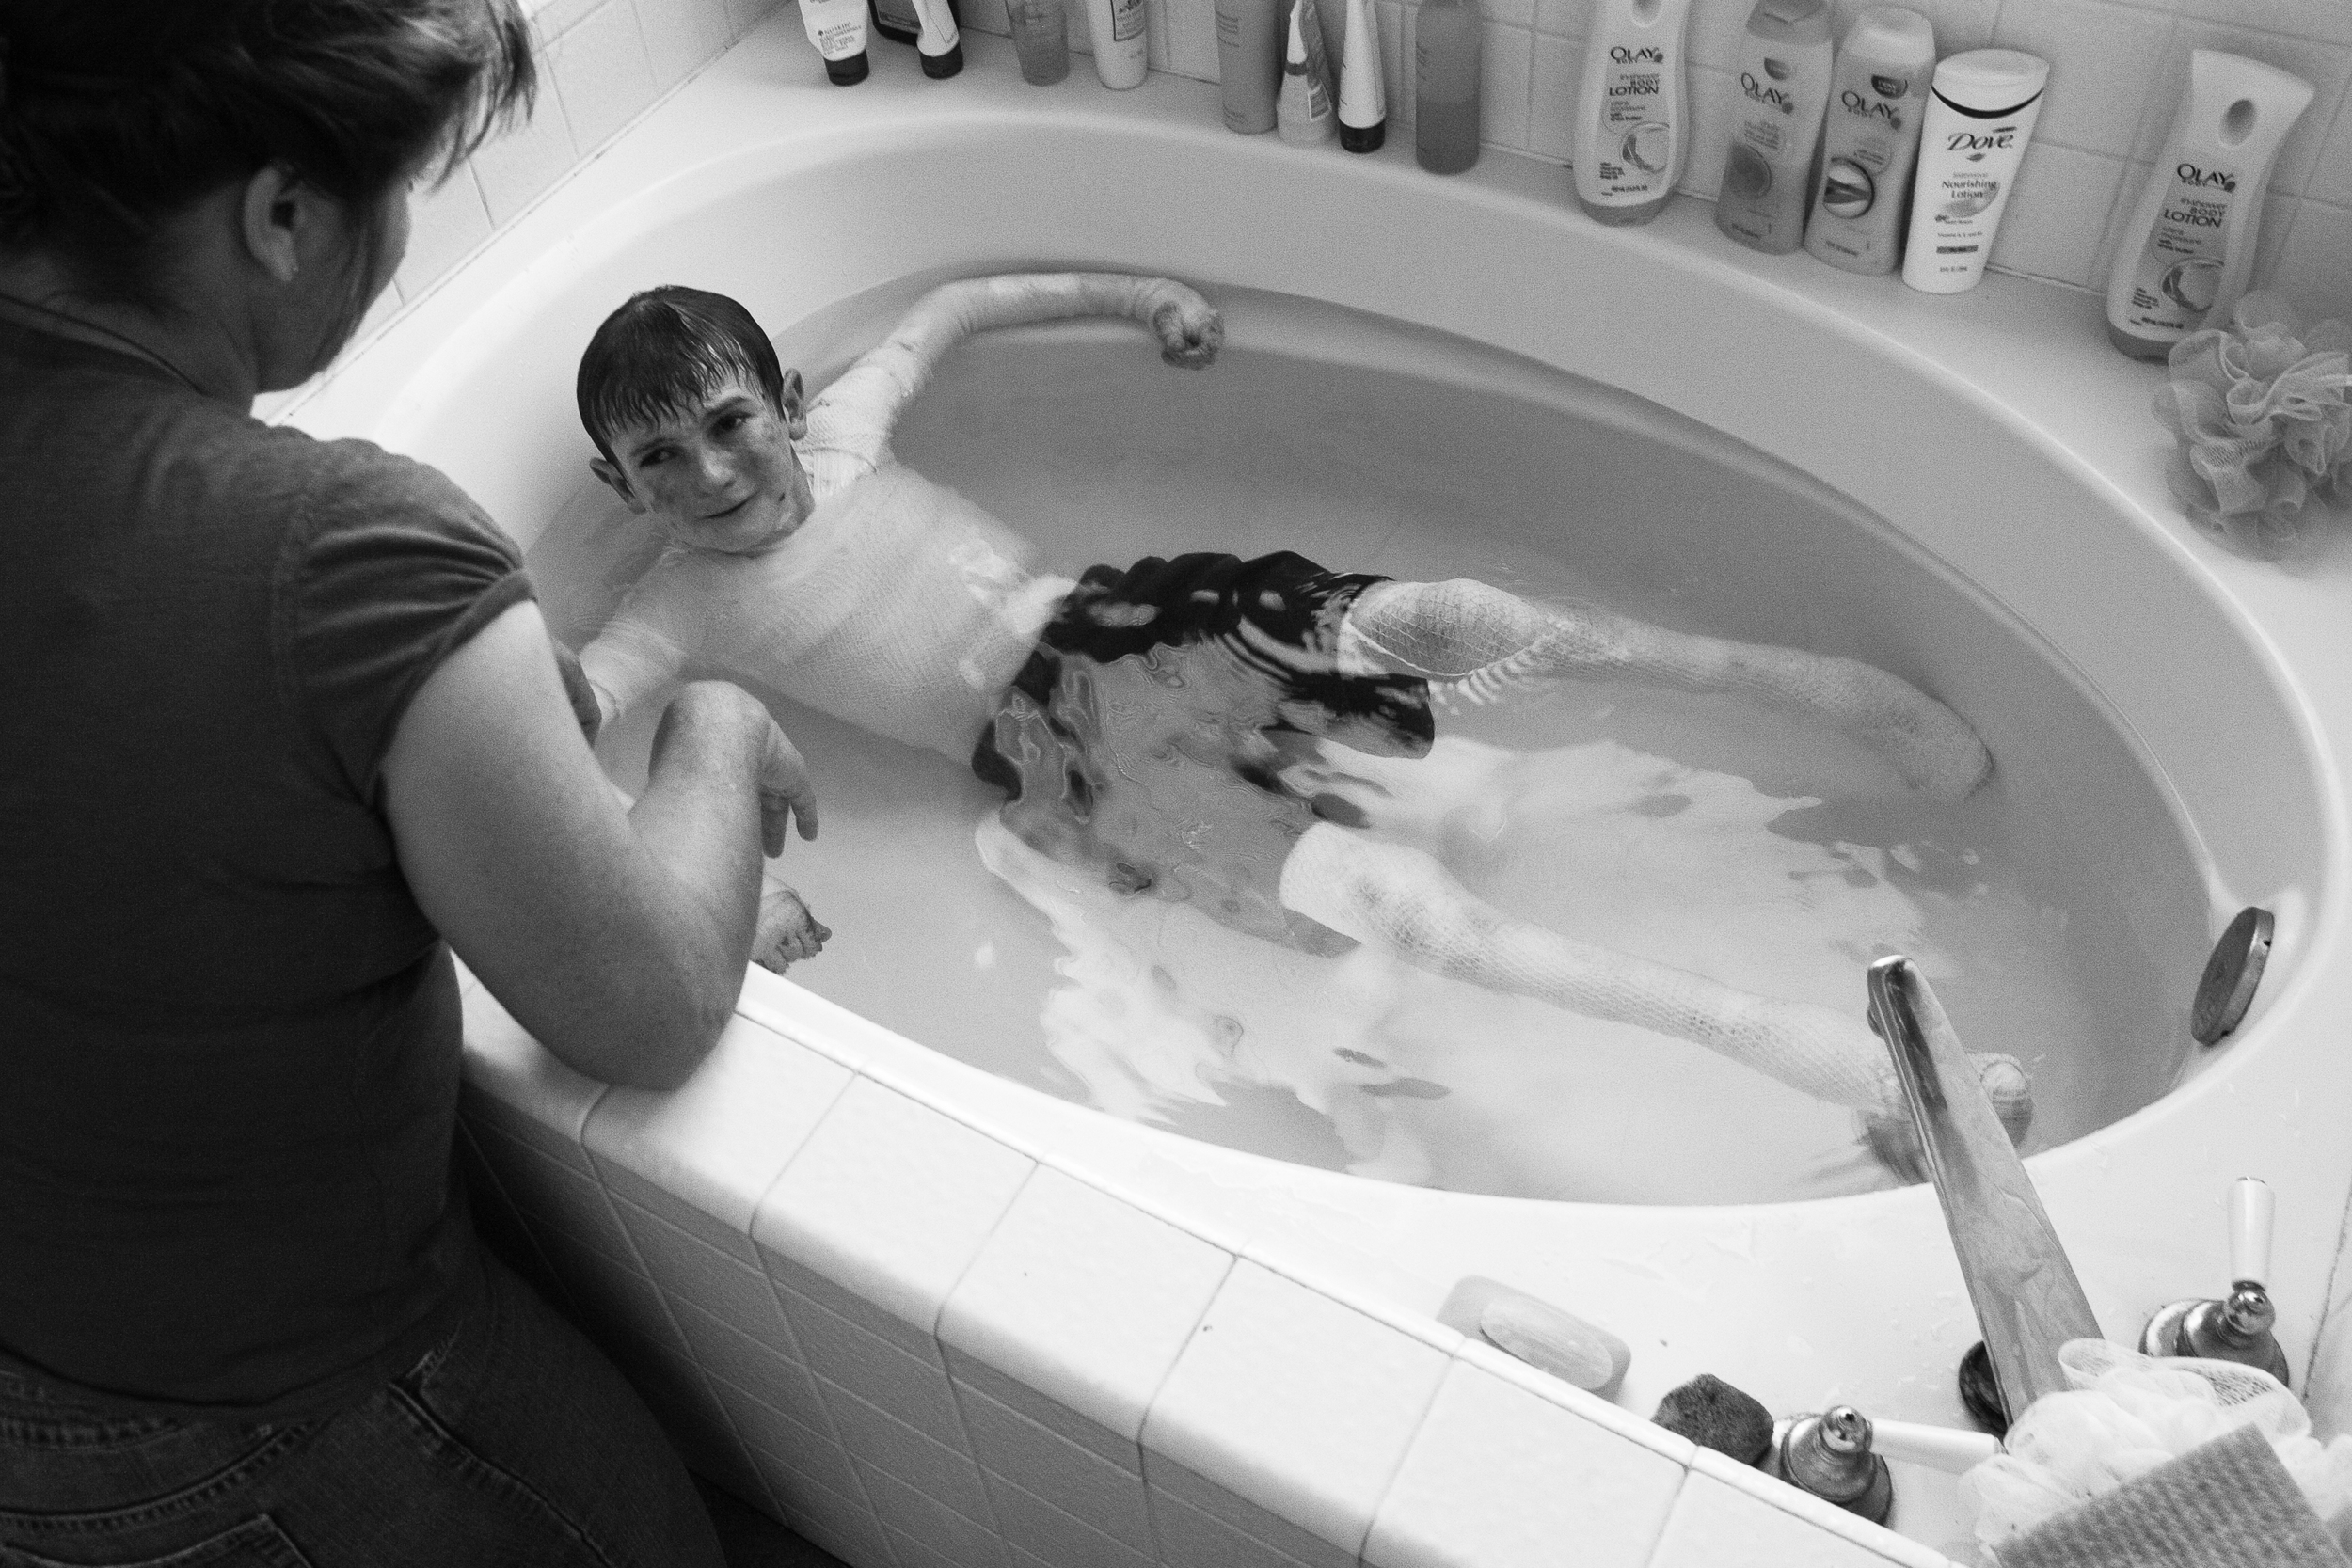  Garrett Spaulding, 12, holds on tightly to the side of the bathtub during a bandage soak. The jacuzzi is not working where he normally soaks so he must sit in the tub. Garrett is extremely afraid of the bathtub. Lorraine, his mom explains. (Credit I